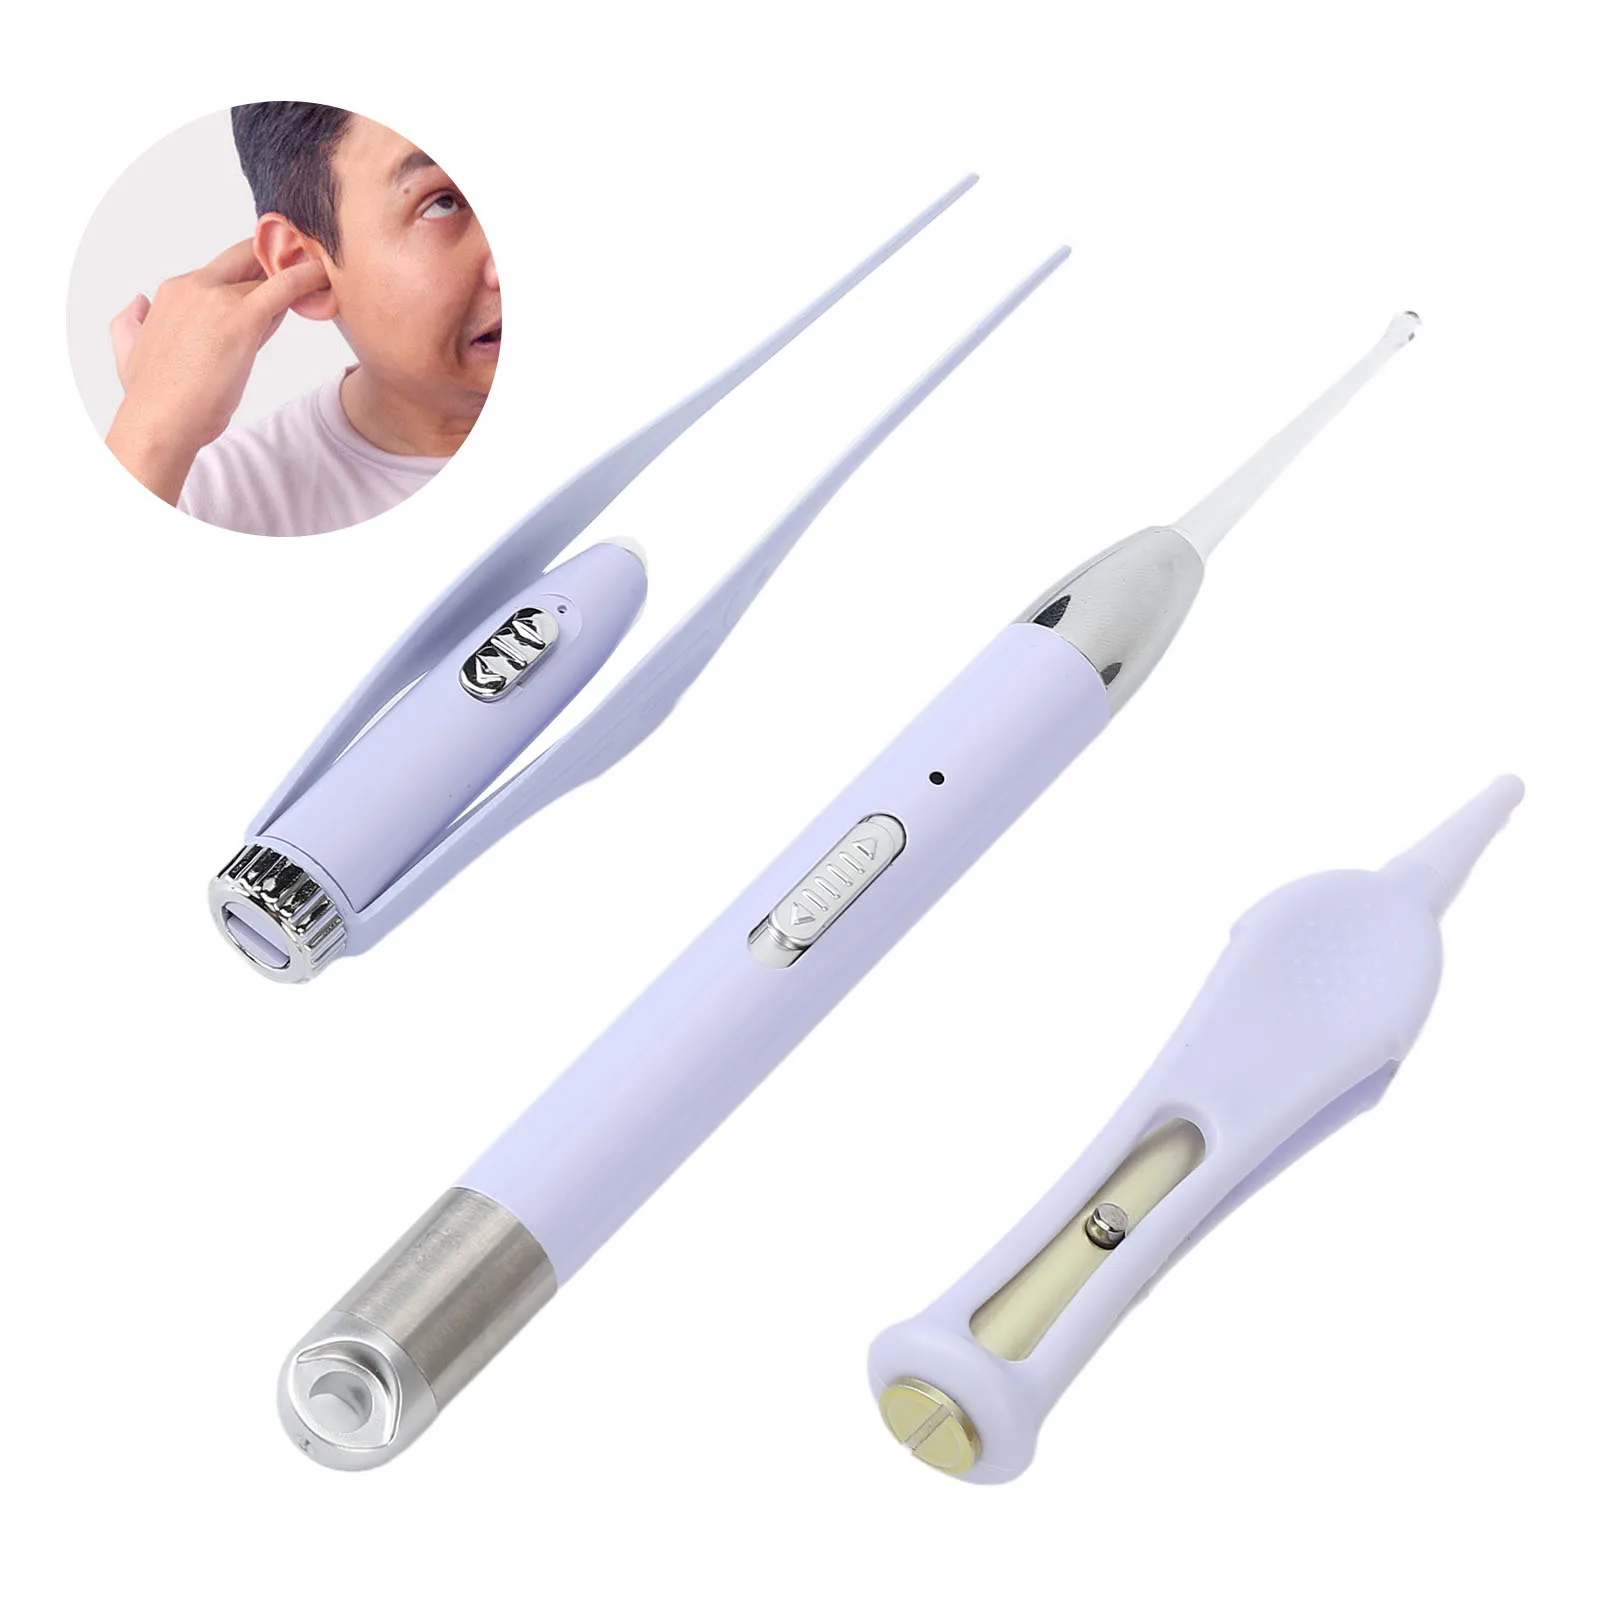 

Visible Glowing Ear Pick Ear Wax Removal Kit Excellent Cleaning Effect Rechargeable Ear Cleaning Tool Kit for Kids Elderly